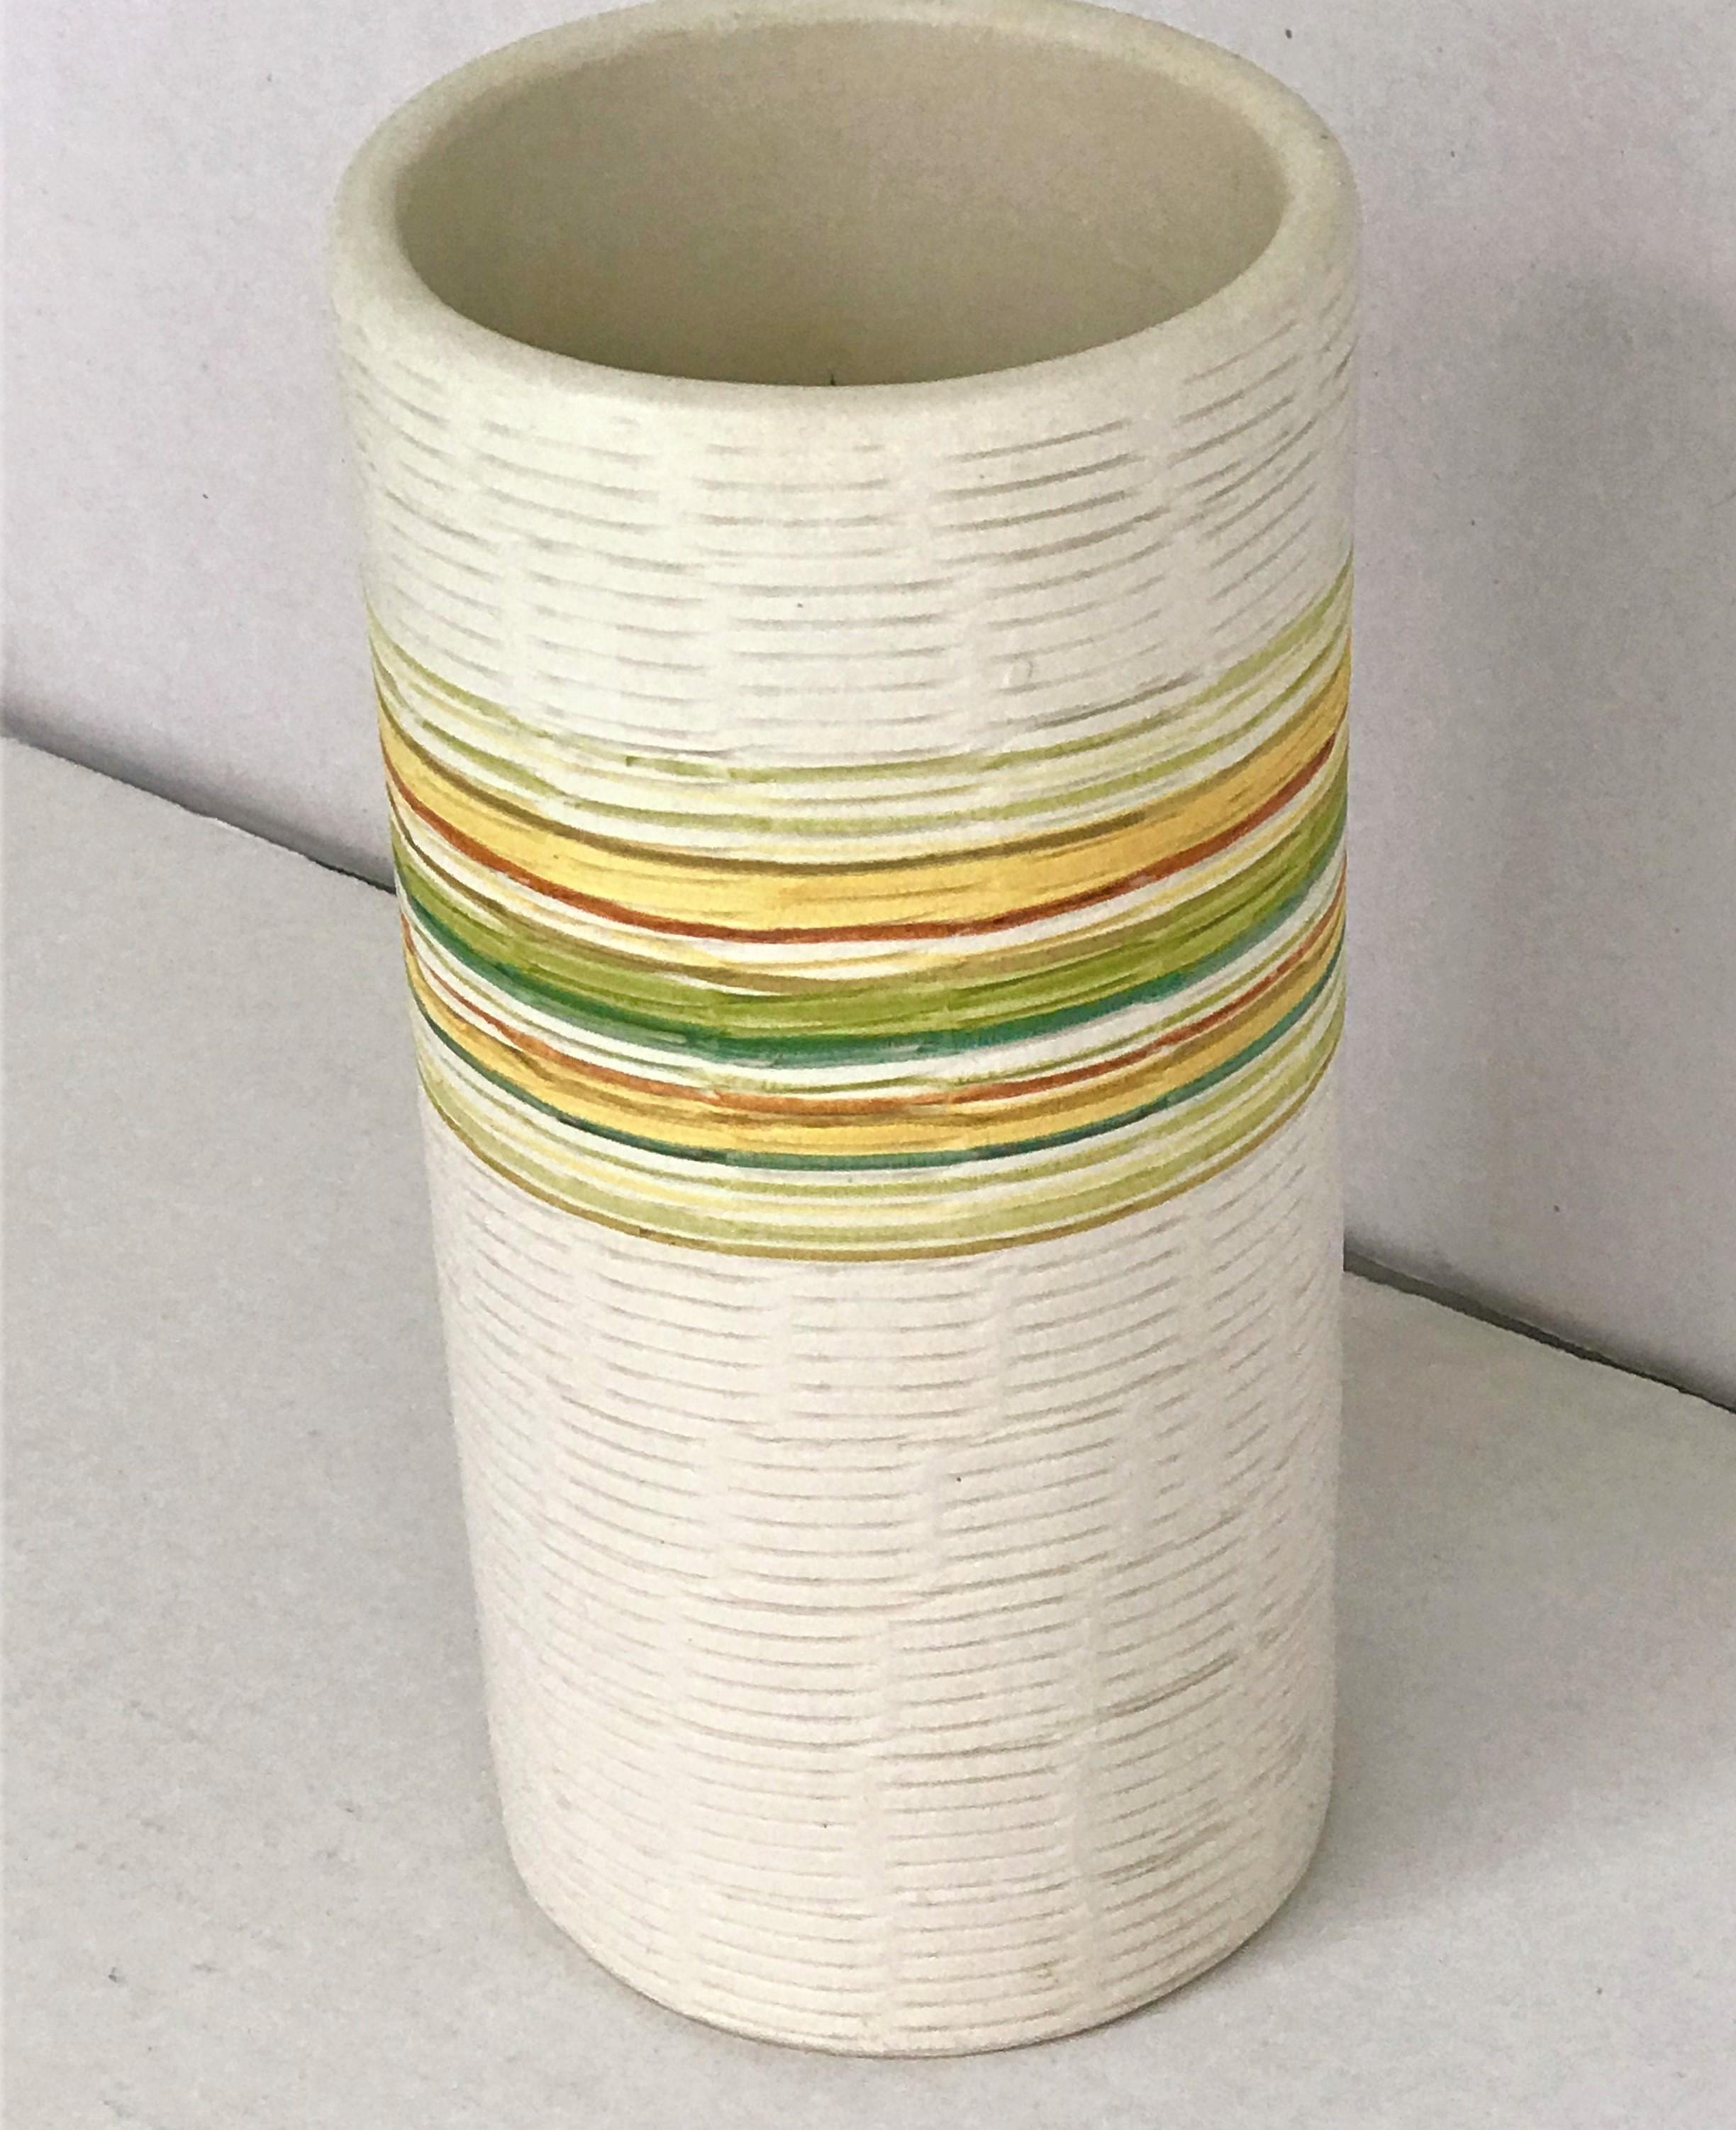 1960s Raymor pottery vase produced by Bitossi, probably designed by Aldo Londi, in Italy. With a design of incised striped with colored bands of moss green, lime green, yellow, mustard, tan and burnt orange on a creamy white background. A beautiful